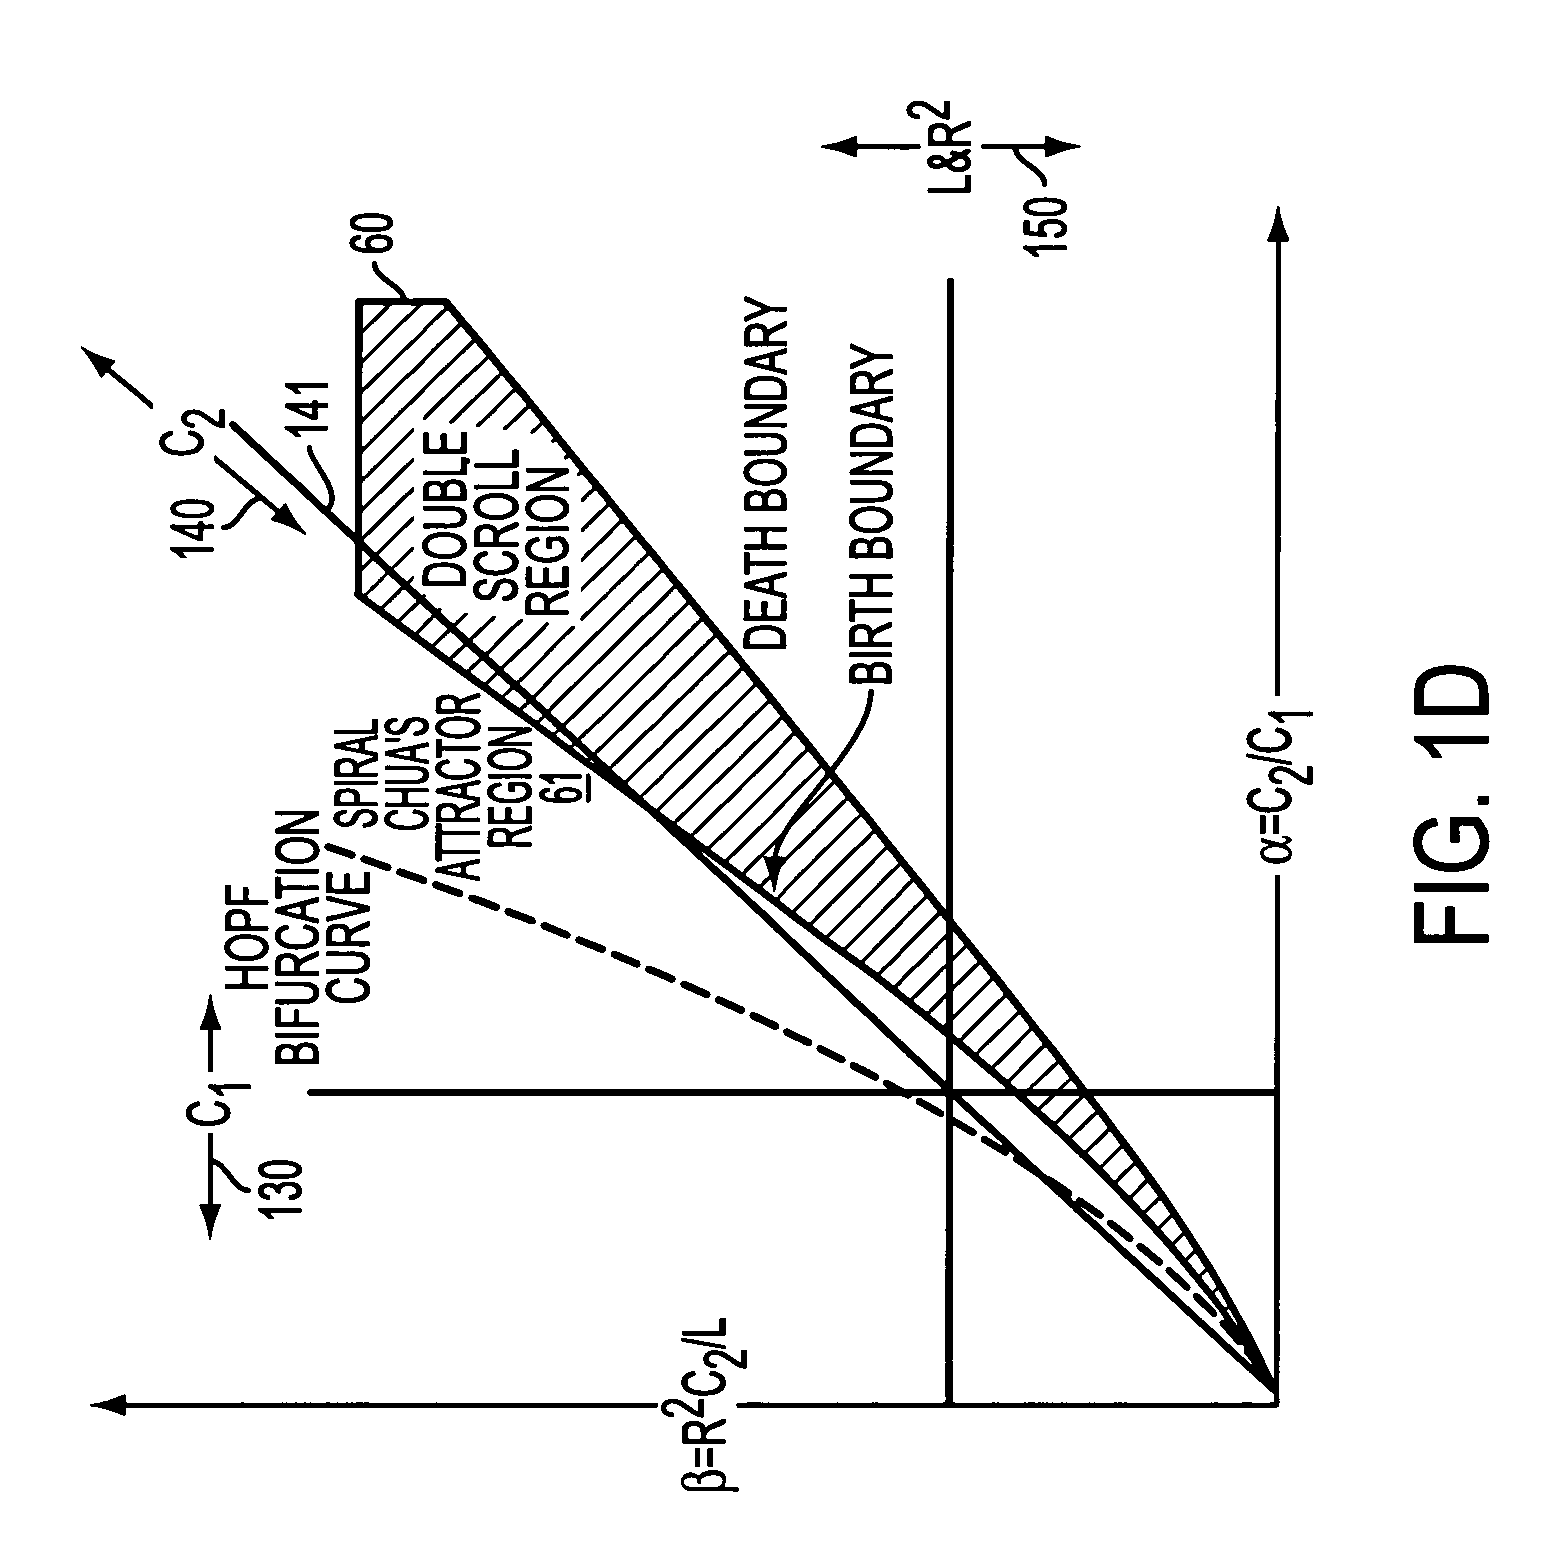 Chaotic communication system and method using modulation of nonreactive circuit elements